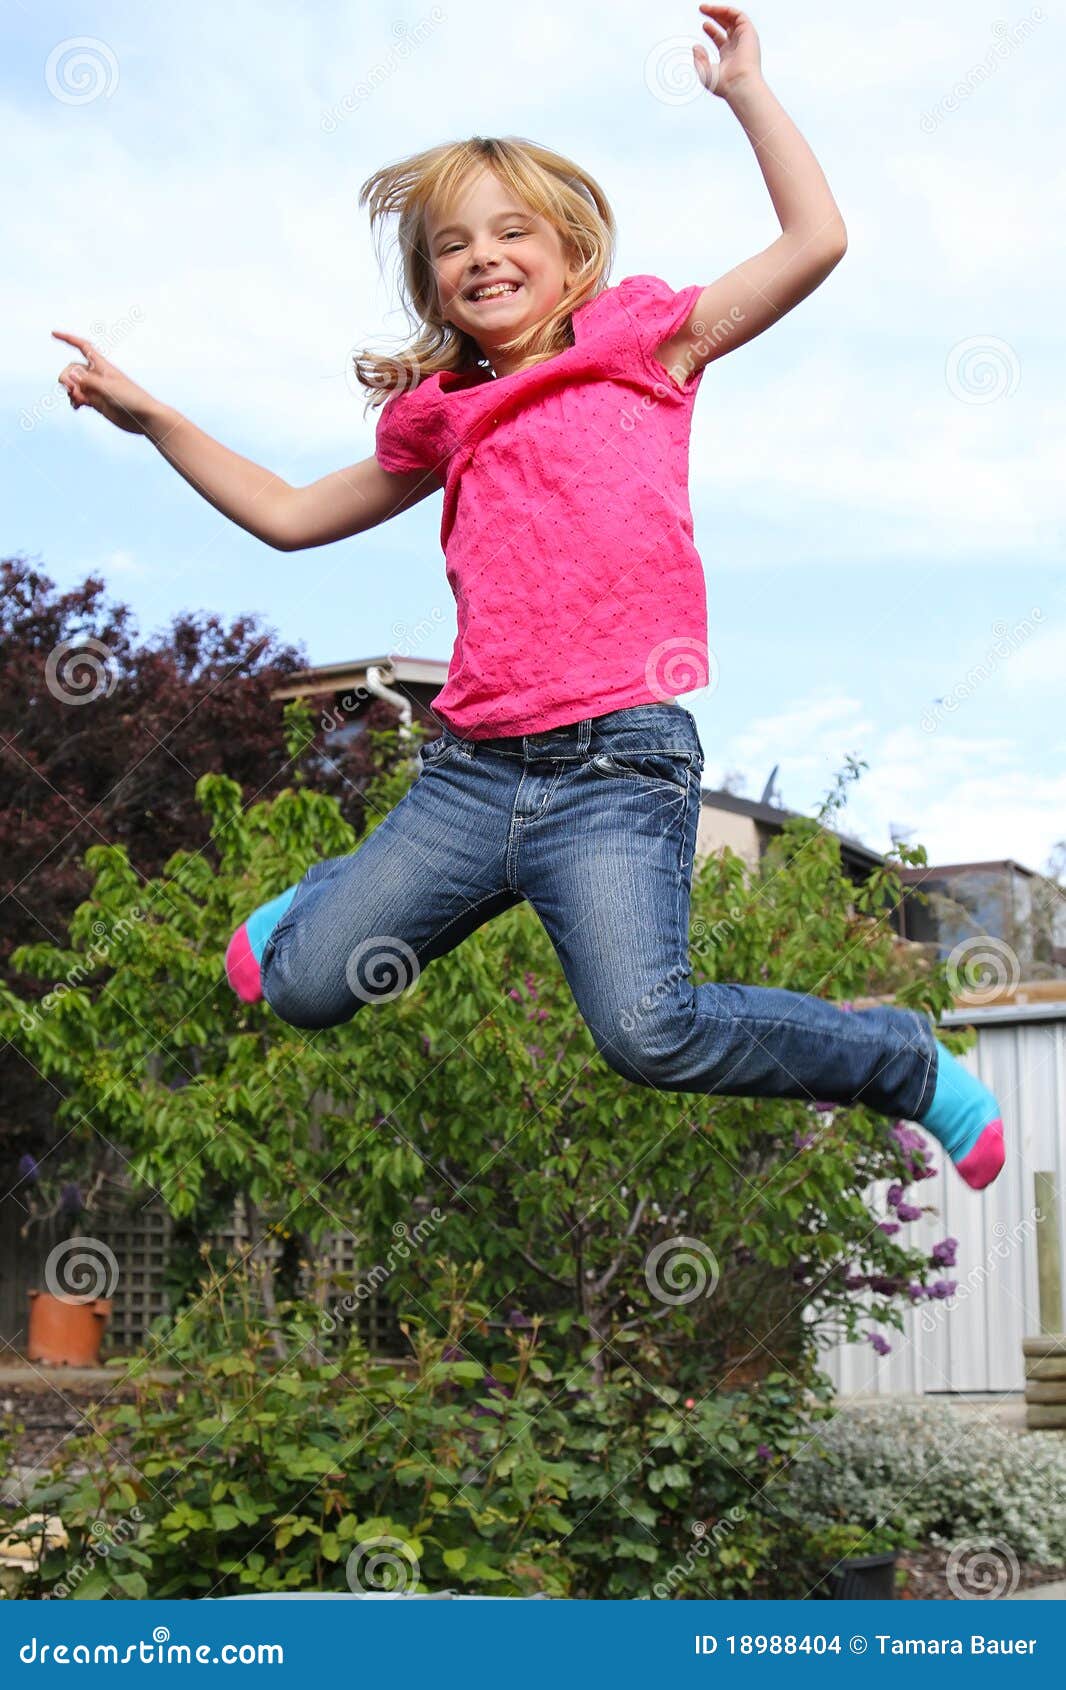 Girl Jumping On Bed Royalty Free Stock Image 39636586